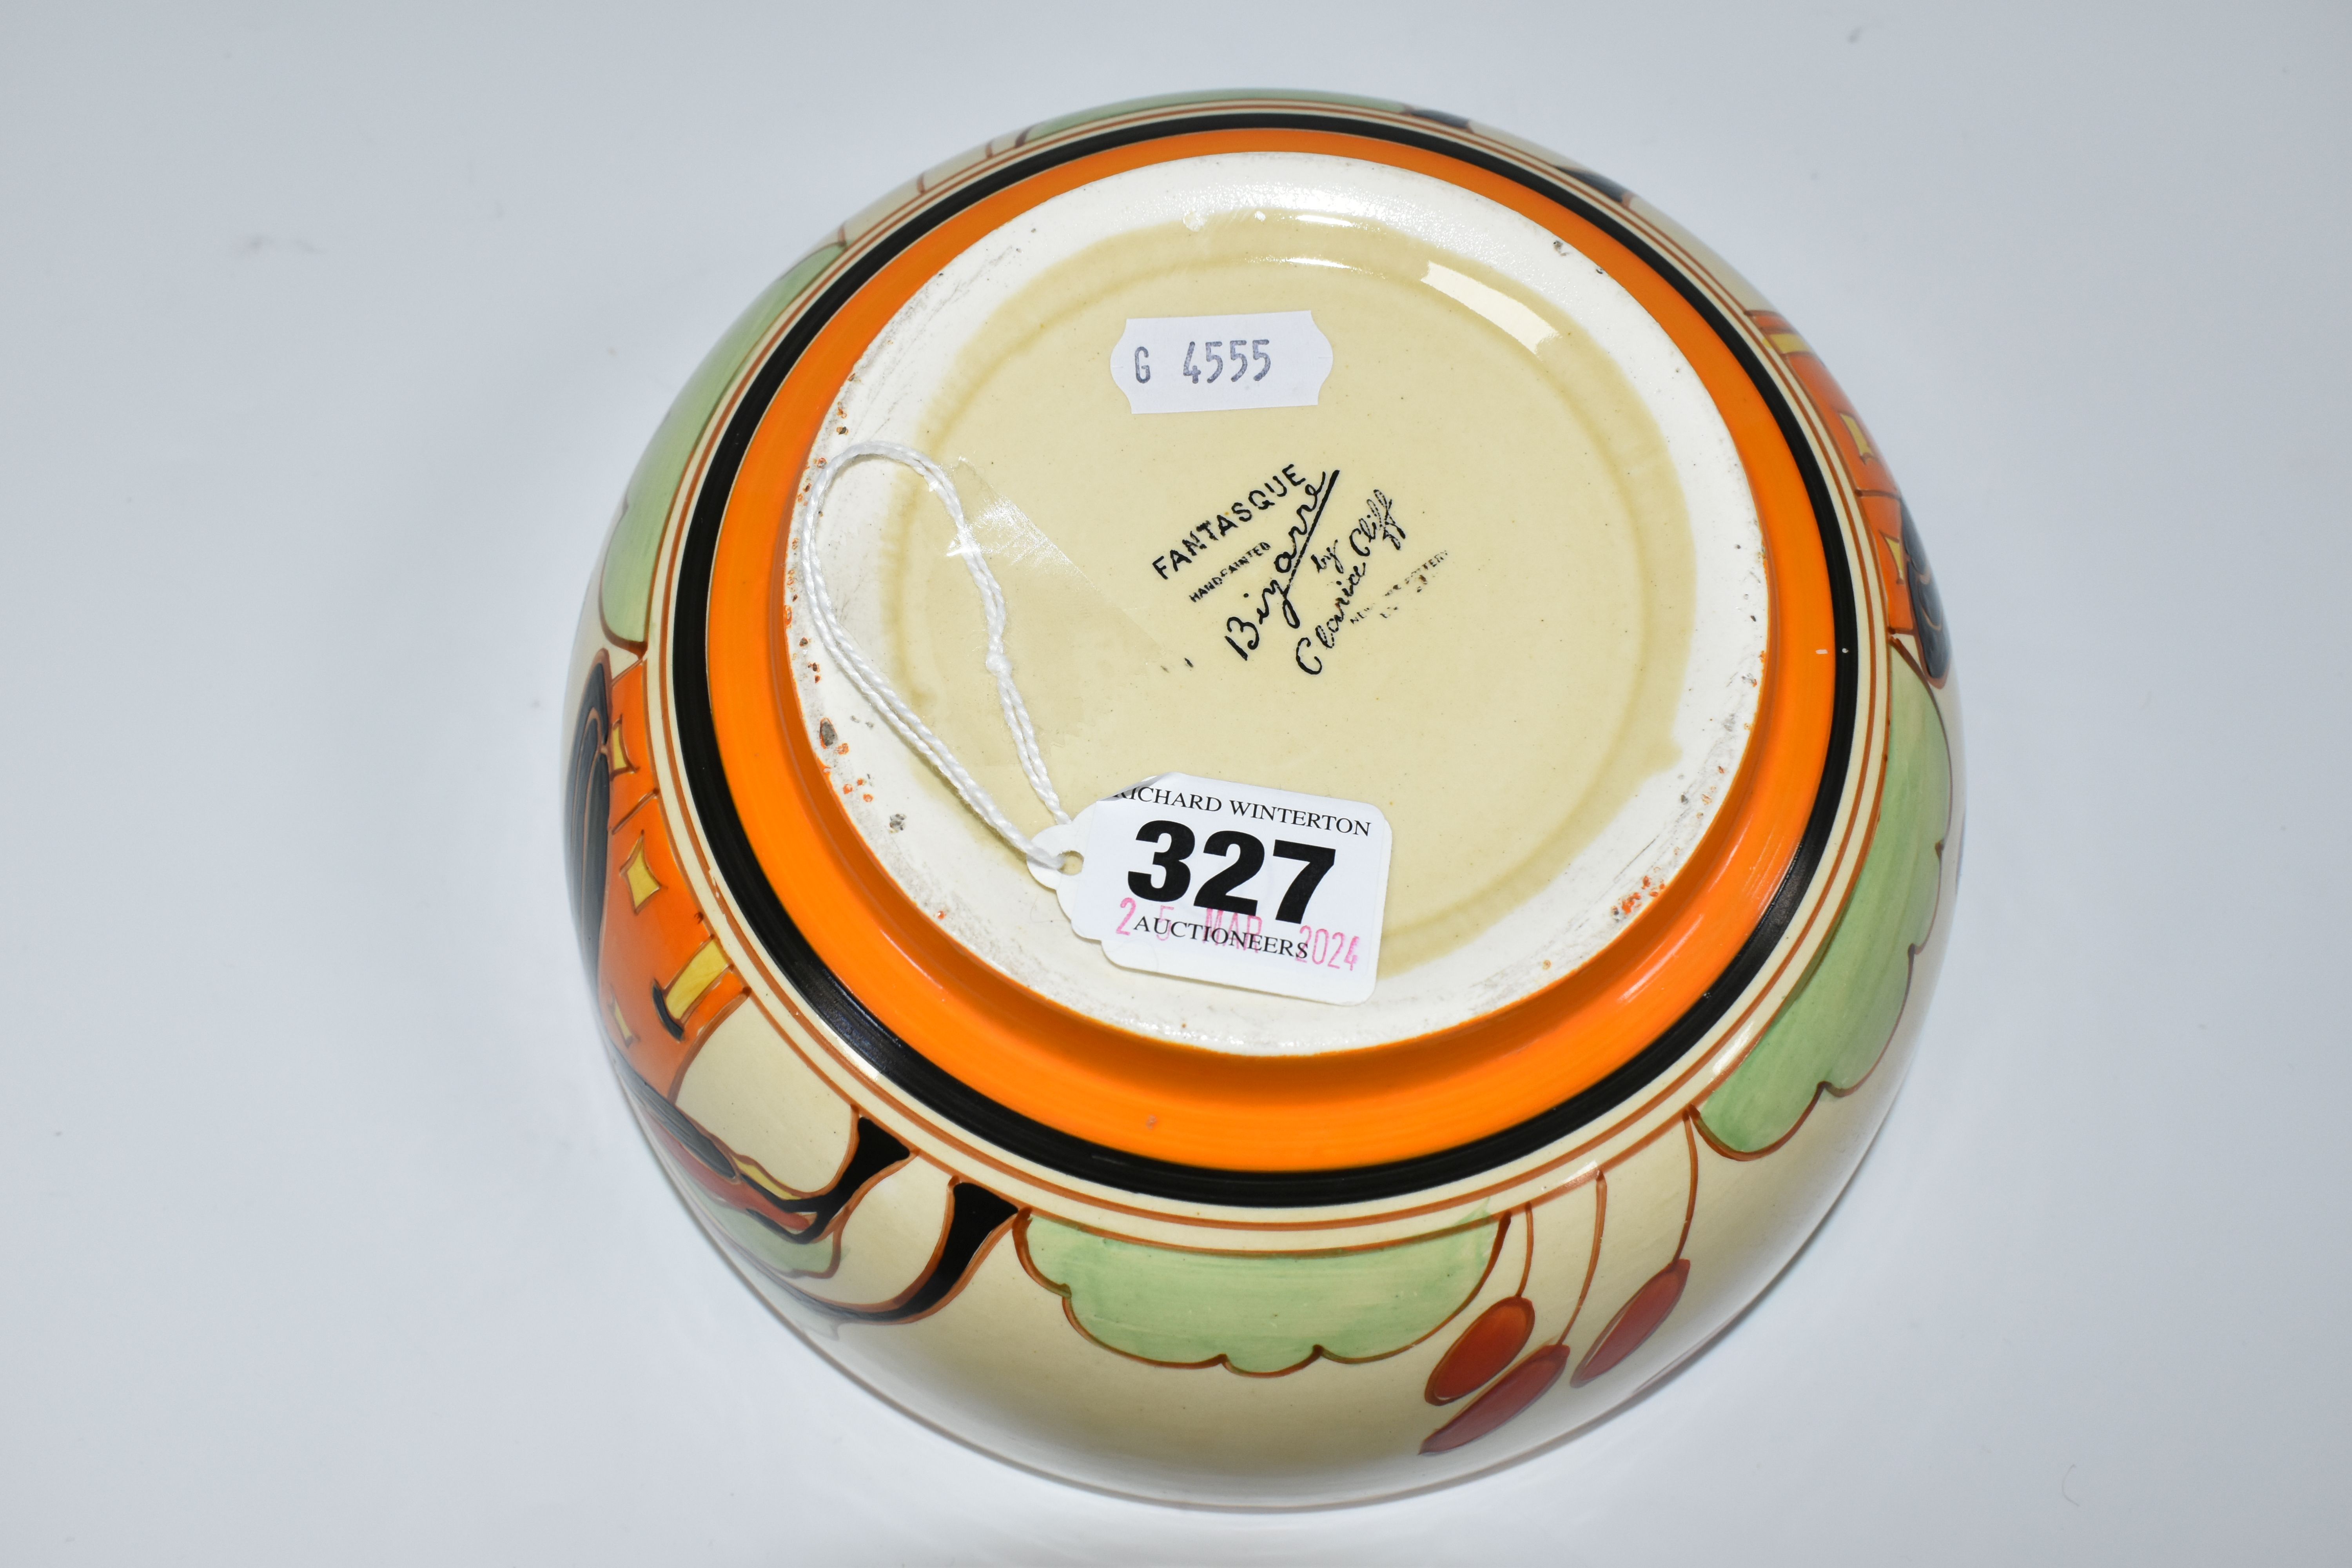 A CLARICE CLIFF FANTASQUE 'ORANGE HOUSE' PATTERN BOWL, painted with two orange houses in a fantasy - Image 5 of 5